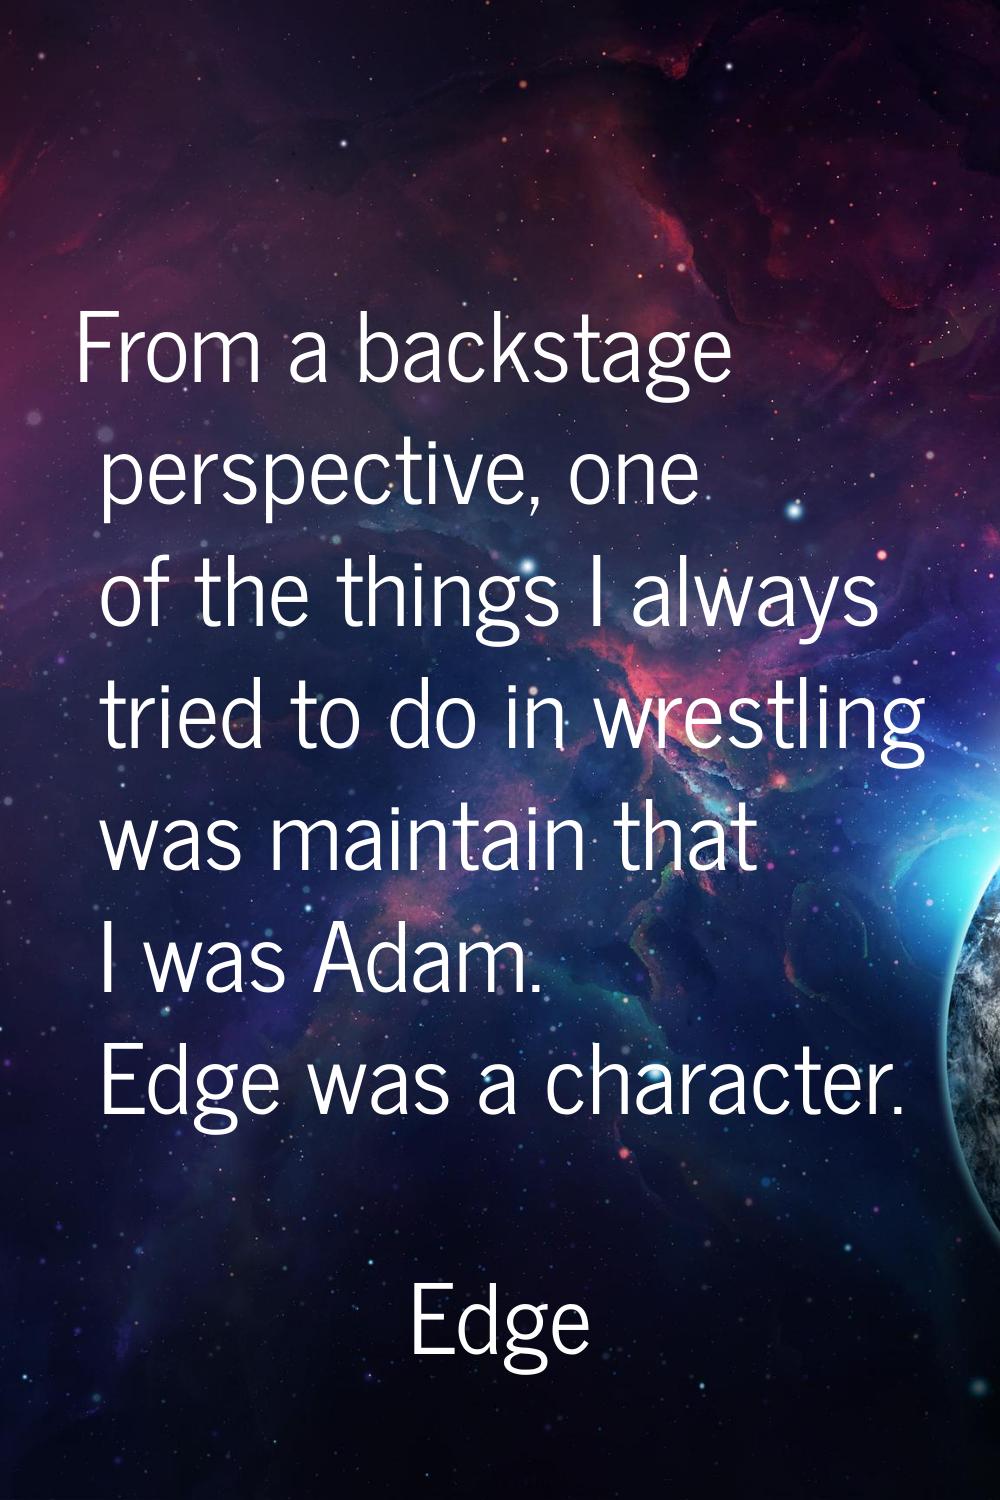 From a backstage perspective, one of the things I always tried to do in wrestling was maintain that